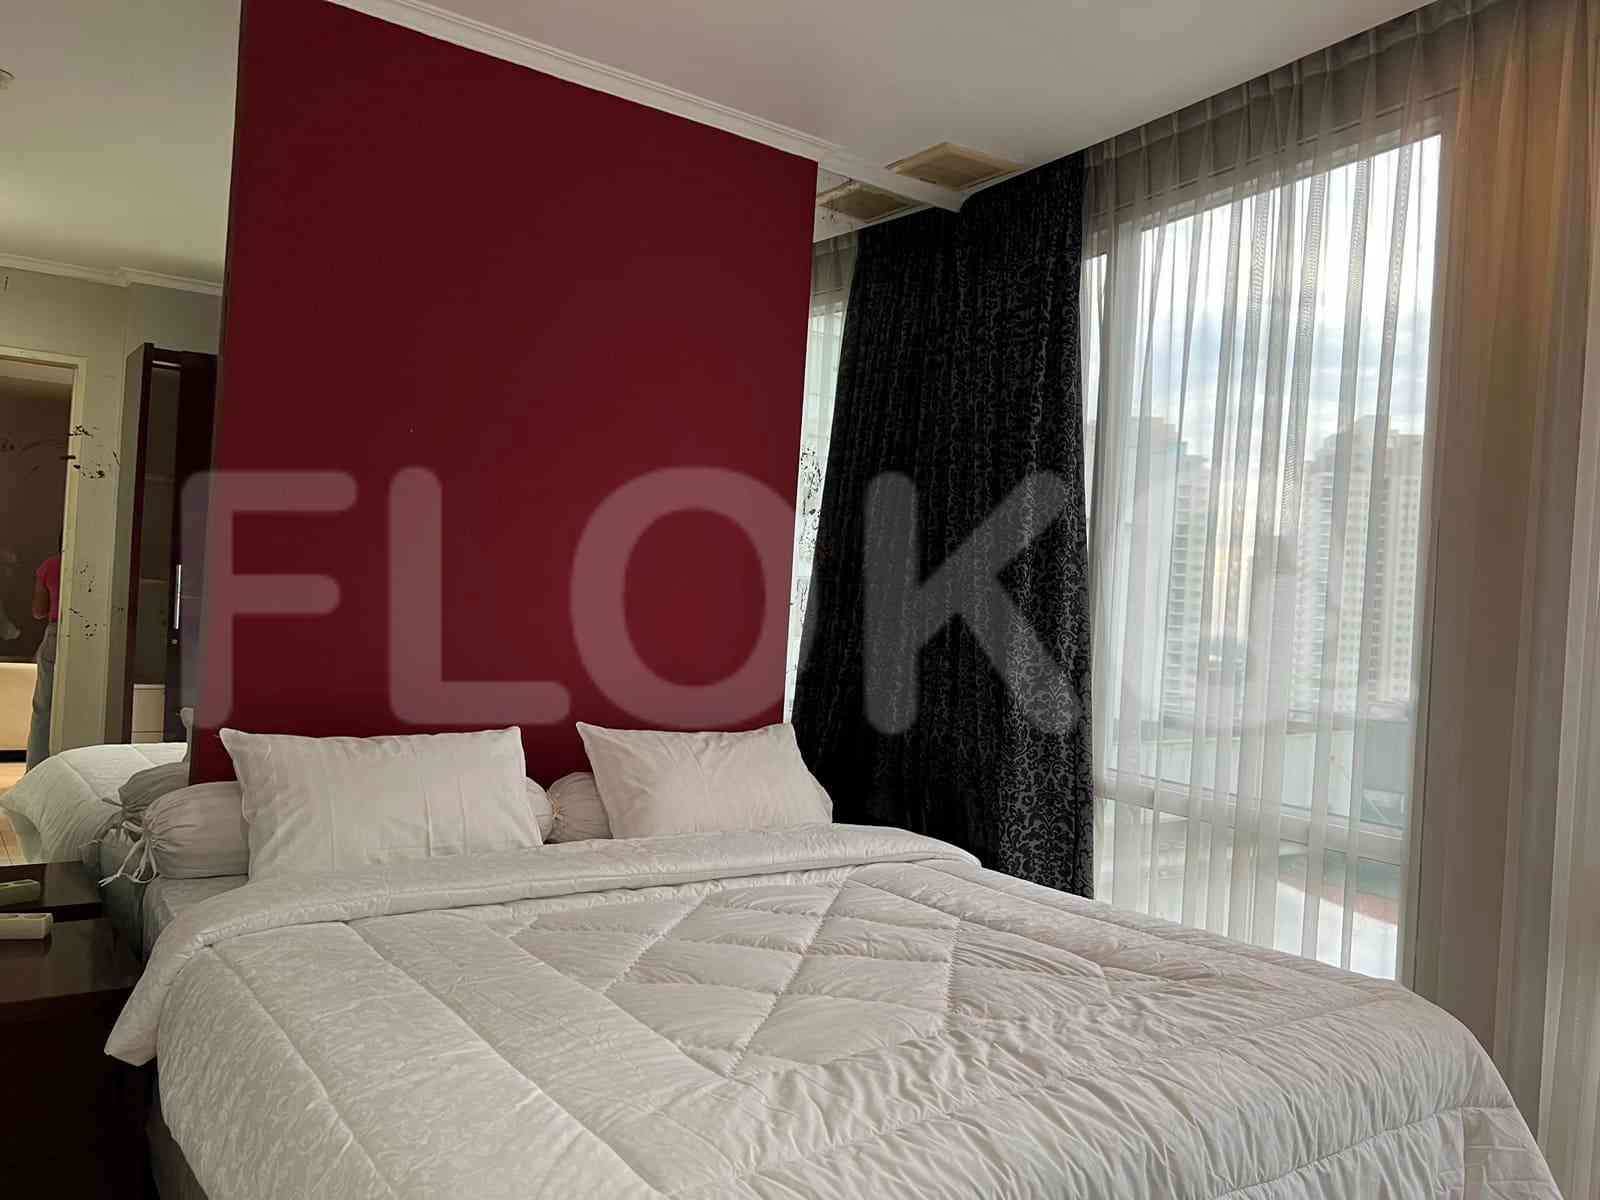 2 Bedroom on 15th Floor for Rent in FX Residence - fsu0f8 4